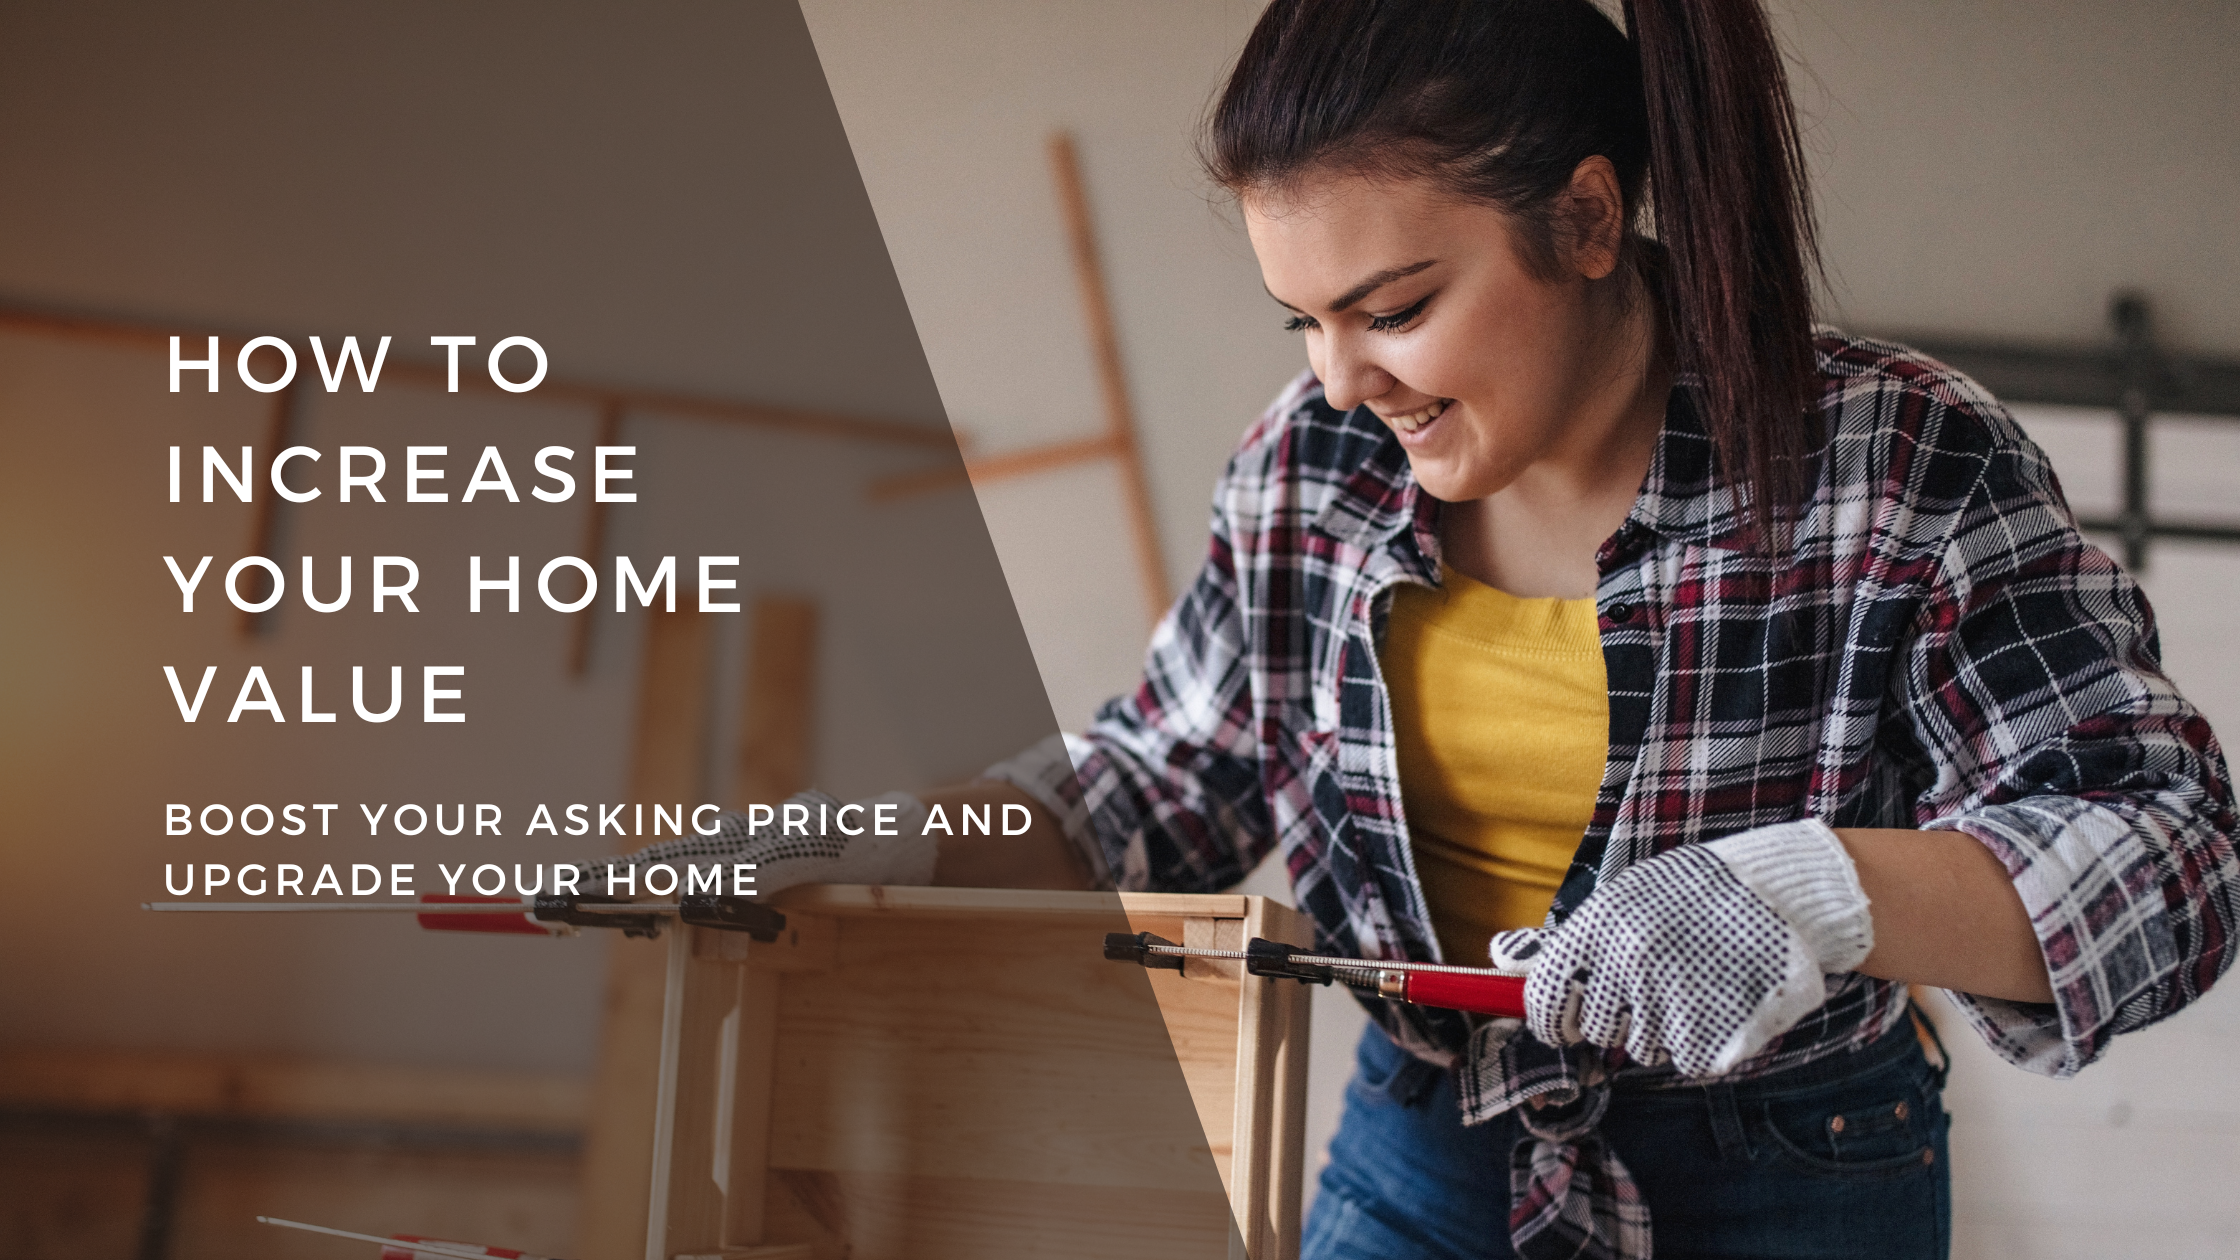 How to Increase Your Home Value